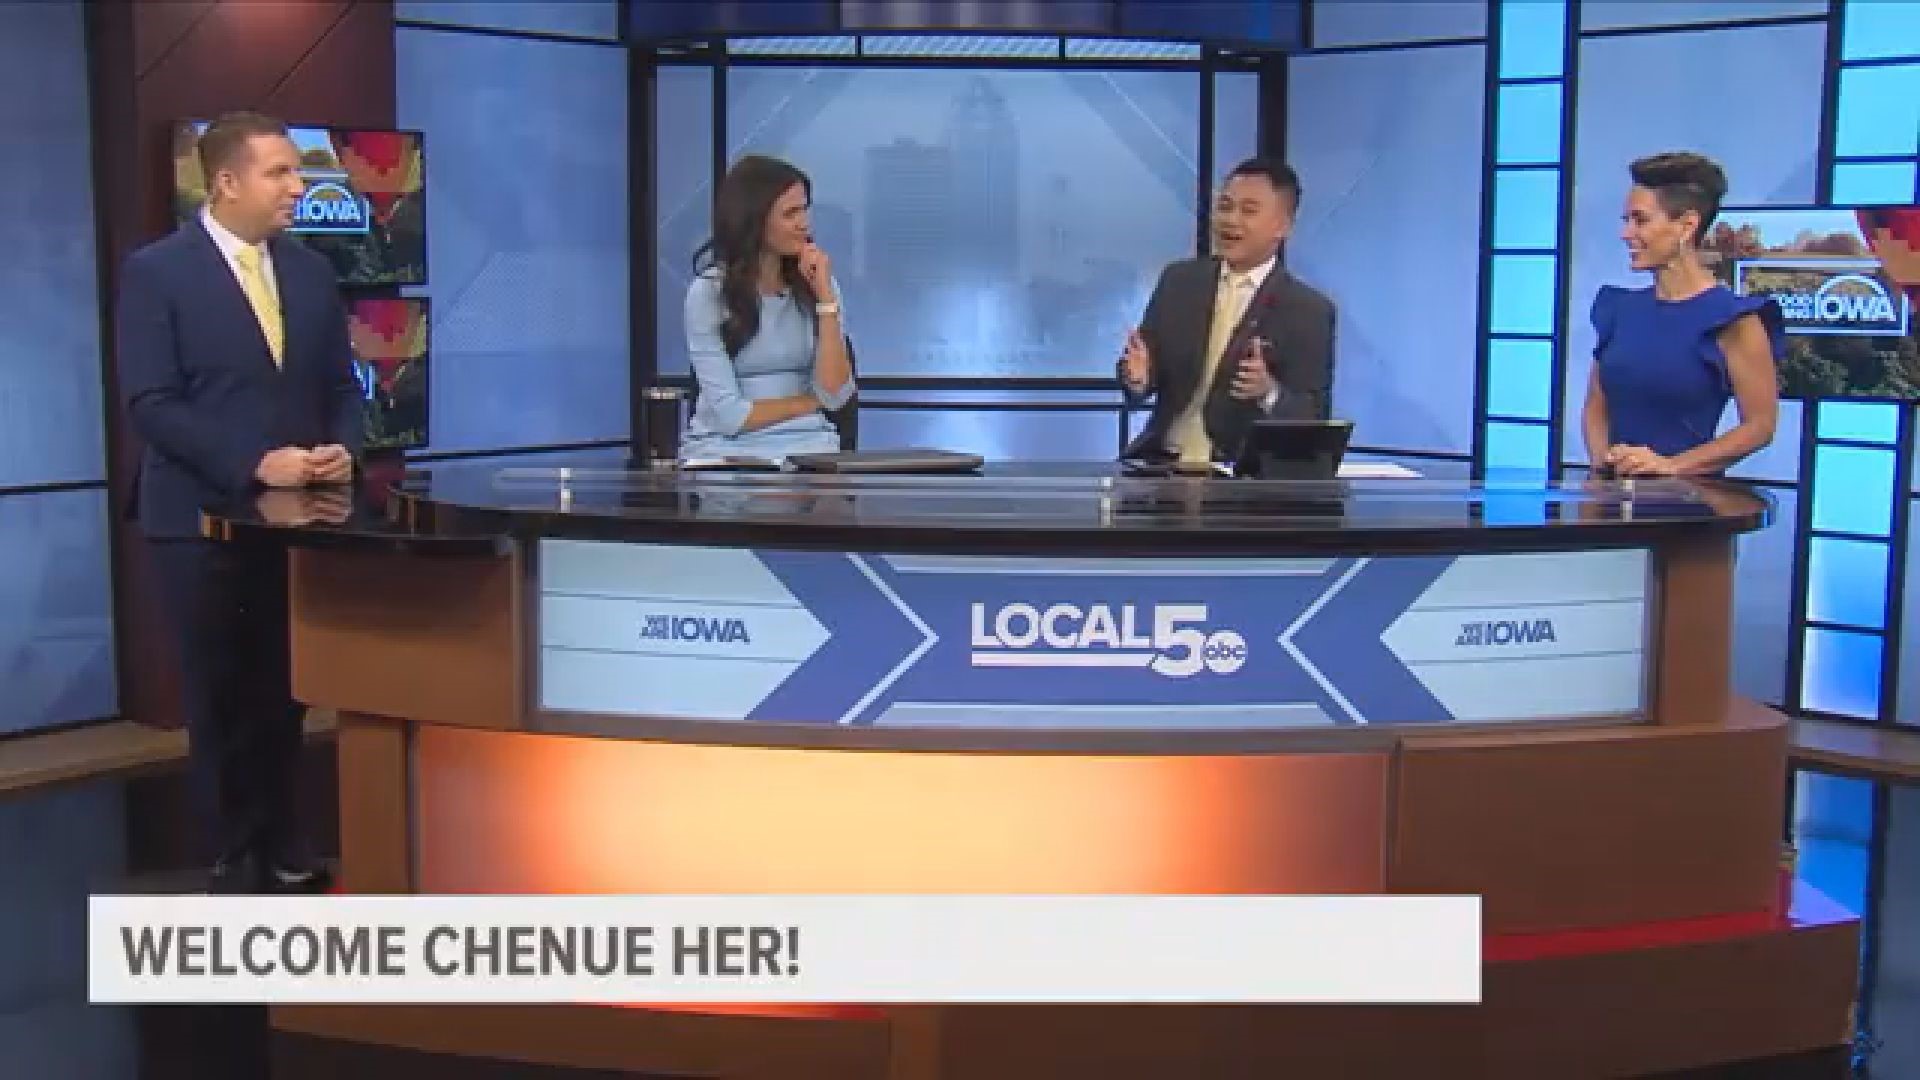 St. Paul native Chenue Her made history by becoming the first Hmong male news anchor in the country at WOI in Des Moines, Iowa.